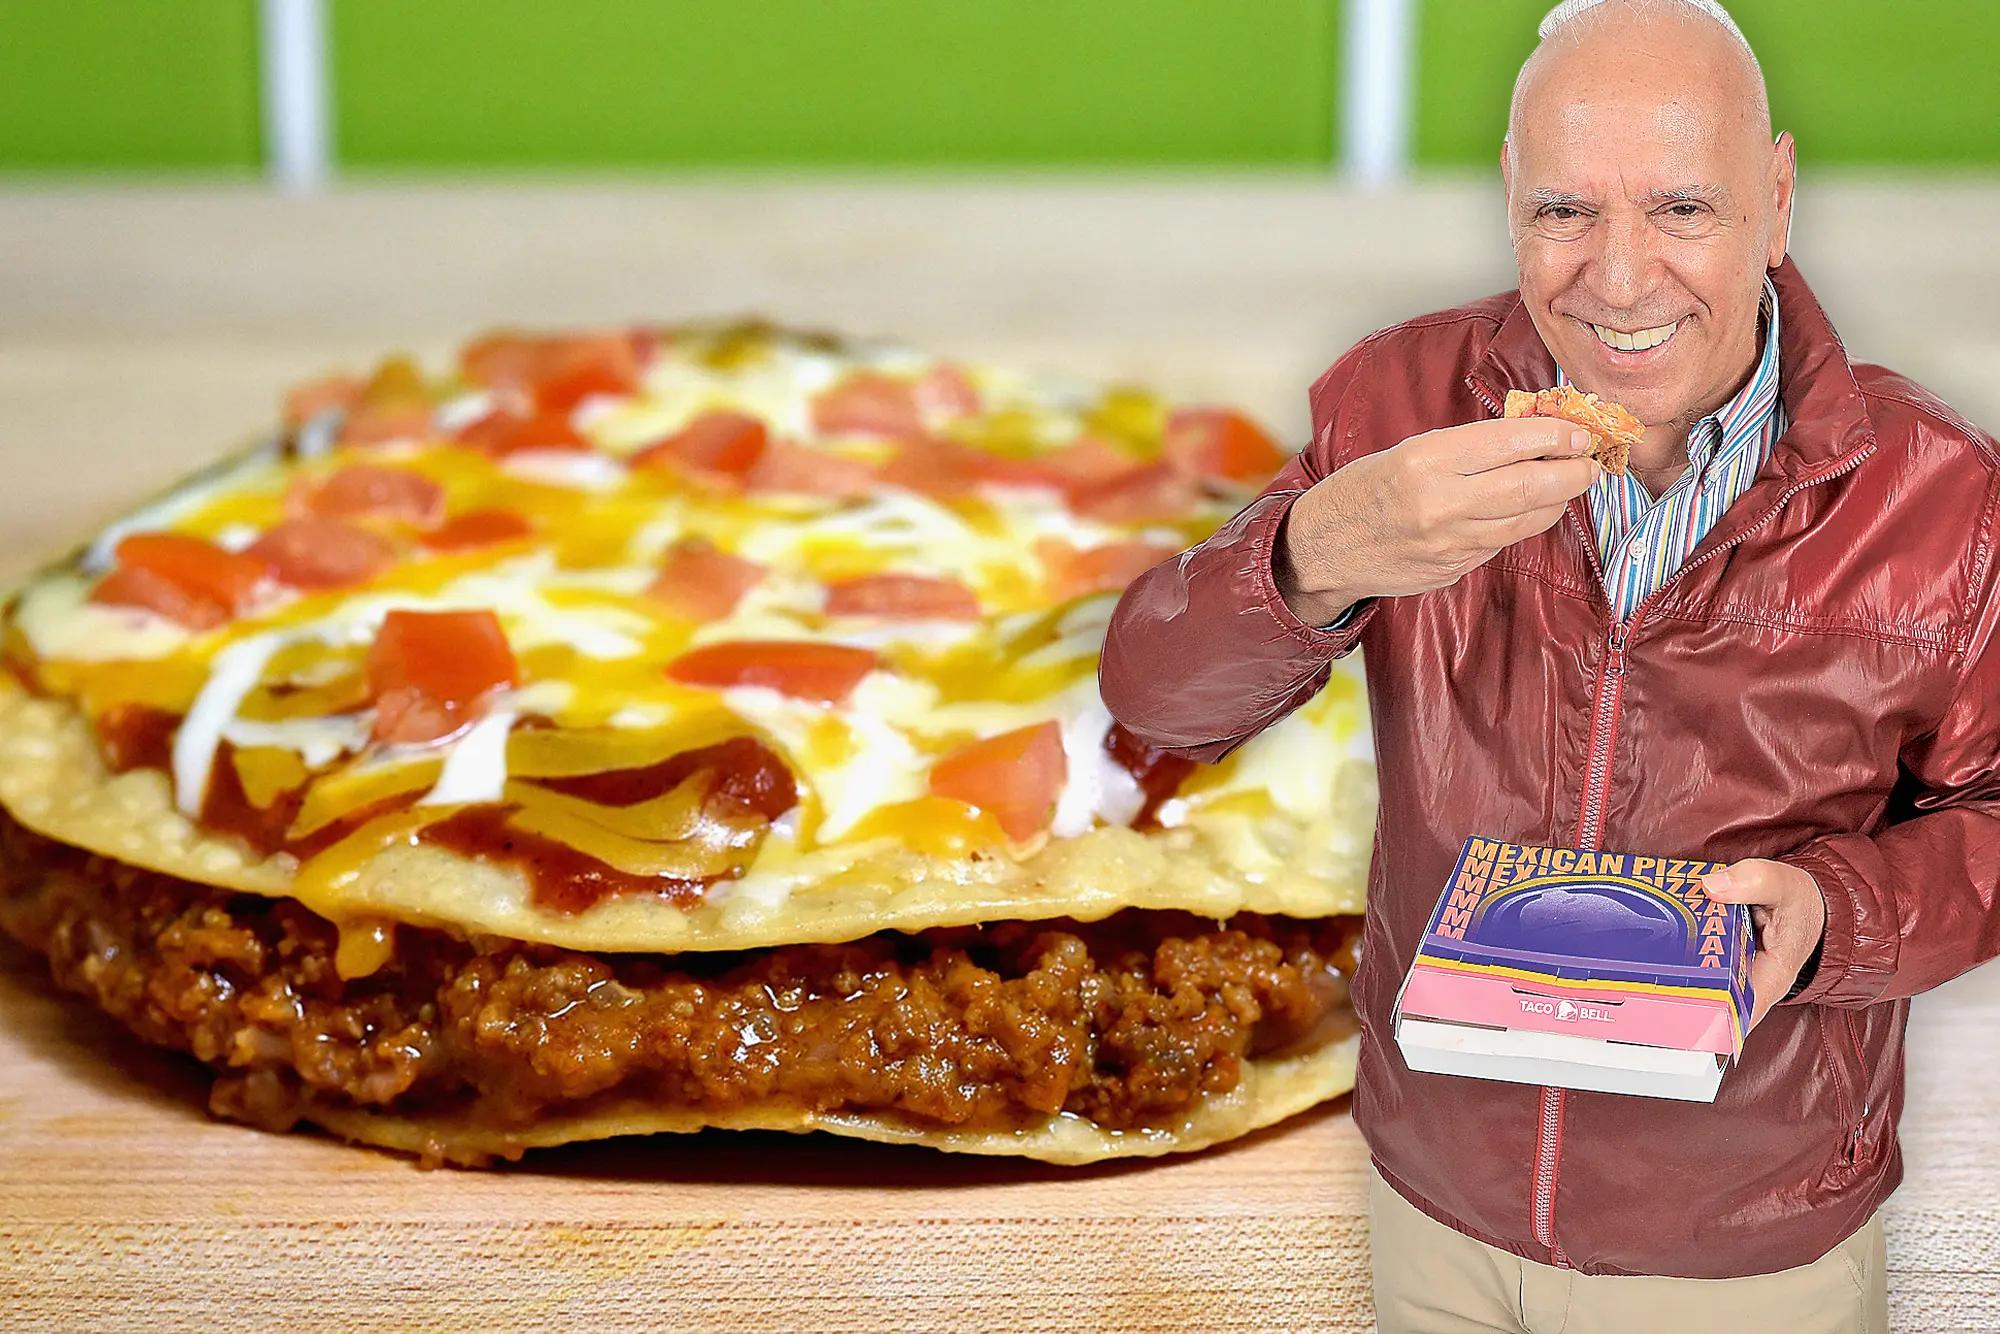 taco bell mexican pizzas - What is the Mexican Pizza at Taco Bell made of